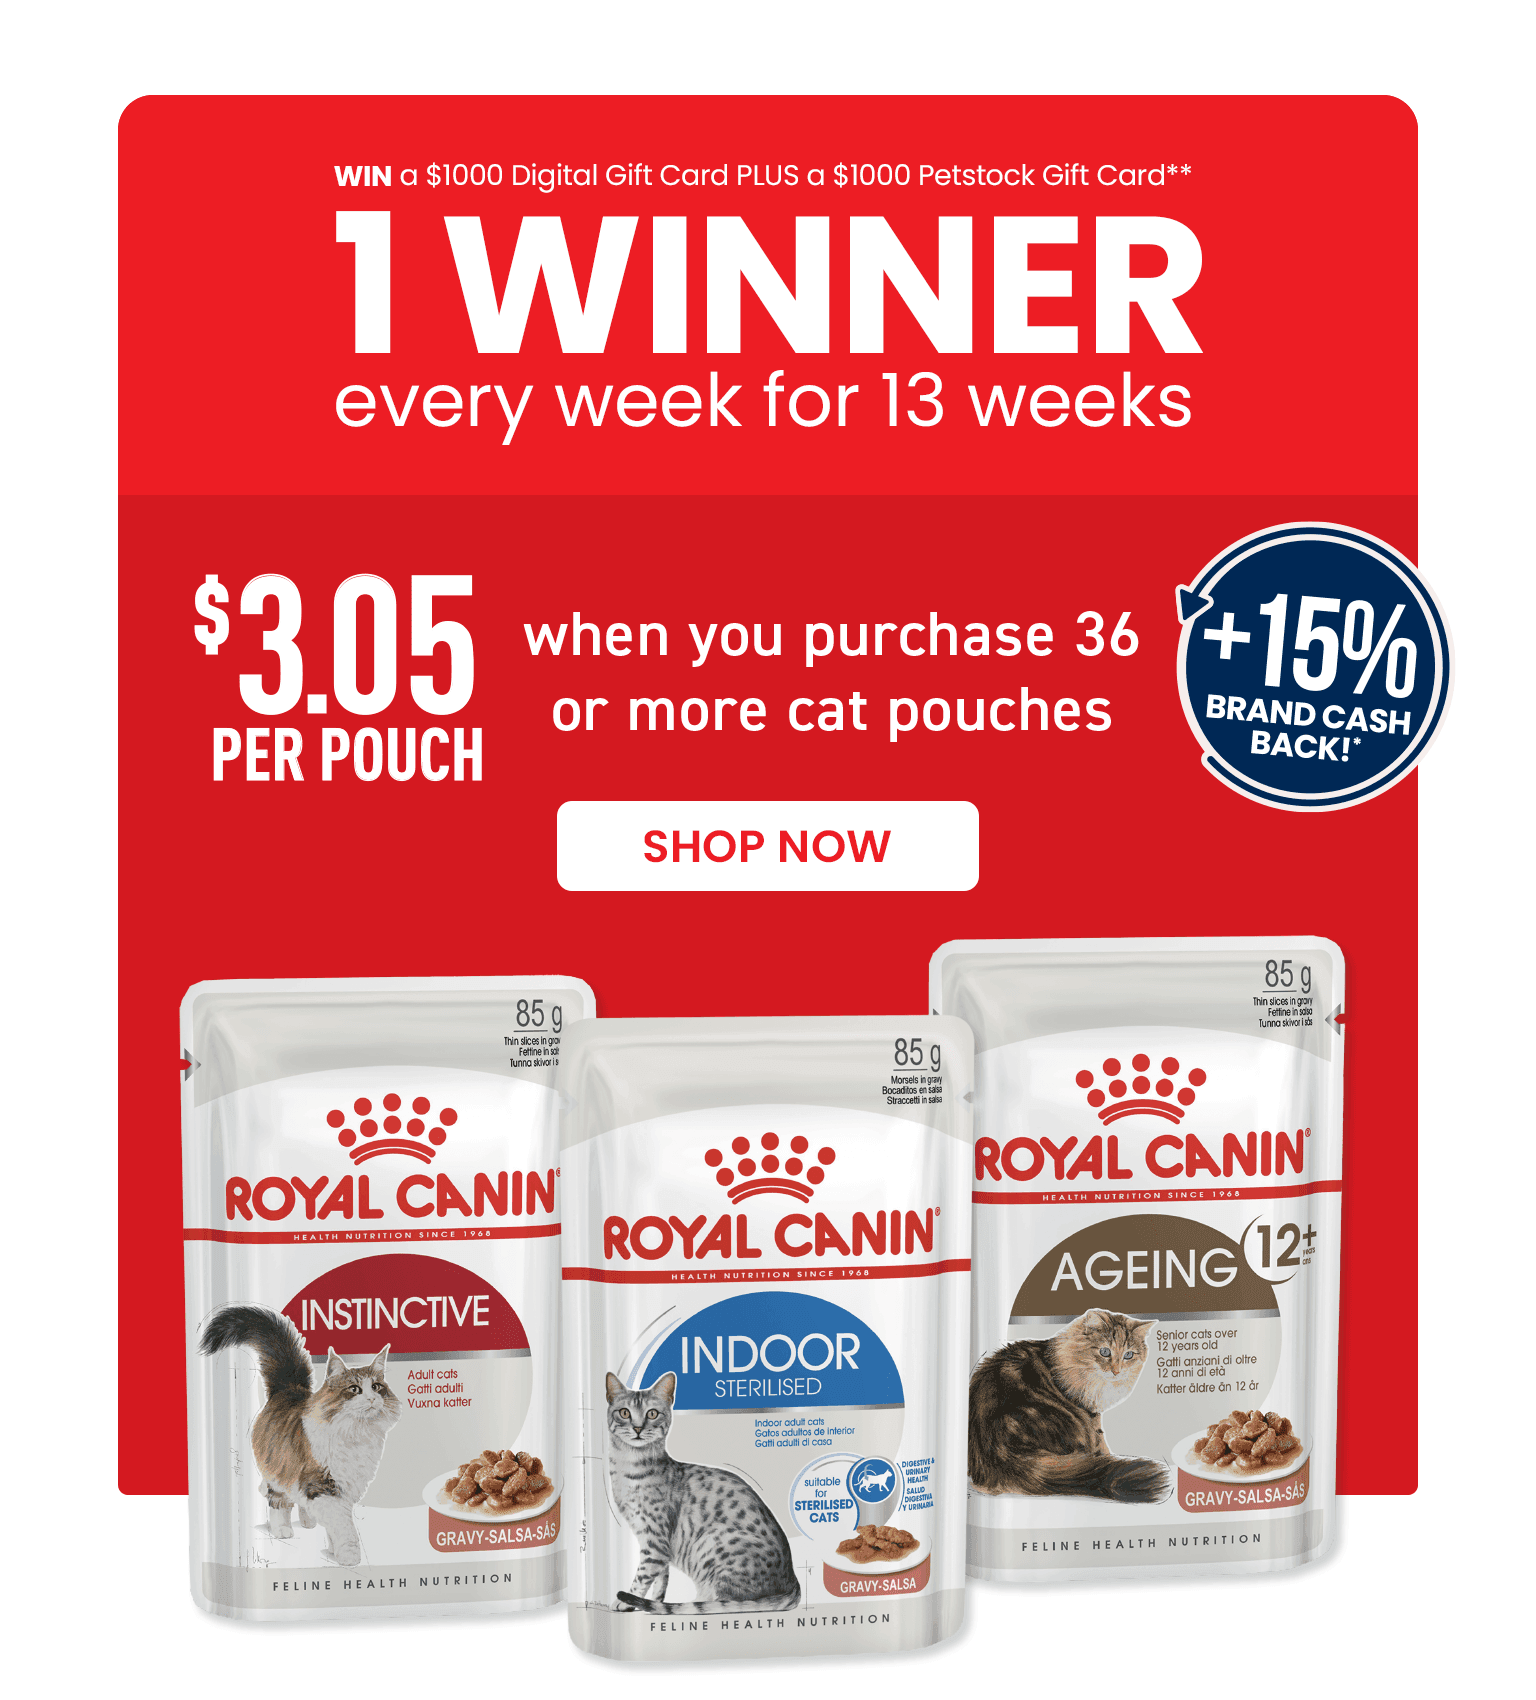 $3.05 per pouch when you buy 36 or more